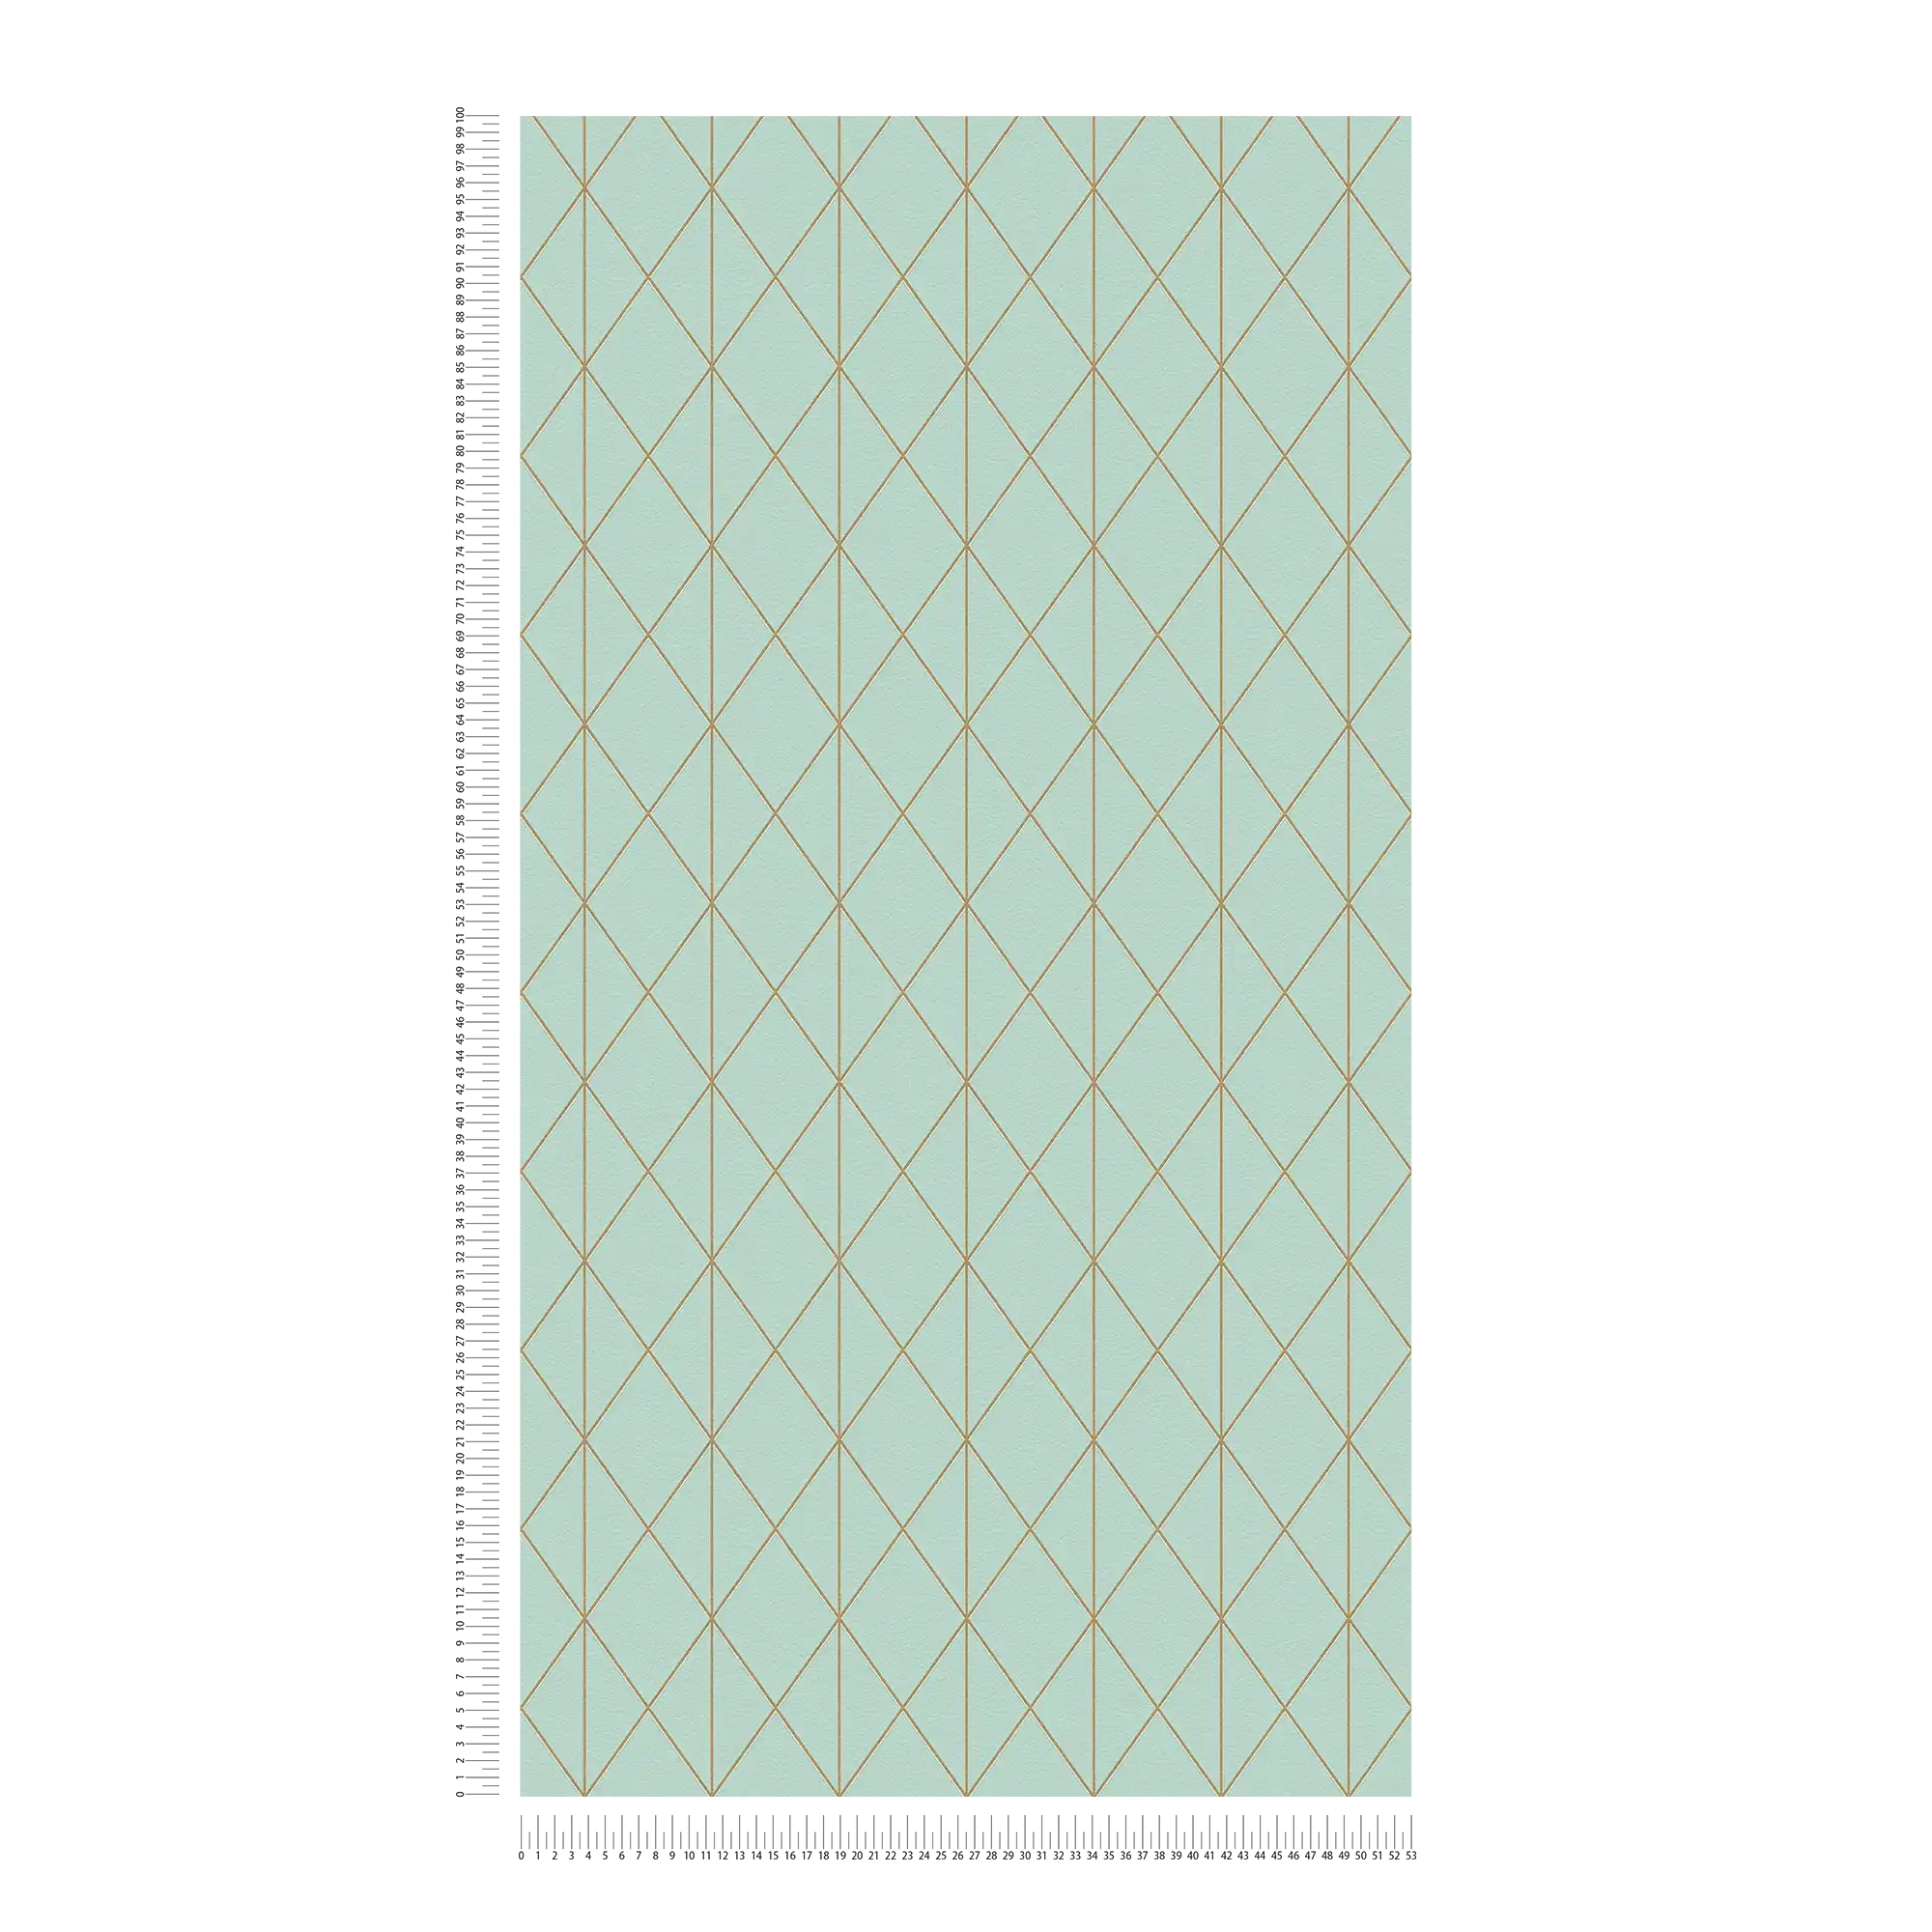             Wallpaper lozenge pattern with gold accent - green, metallic
        